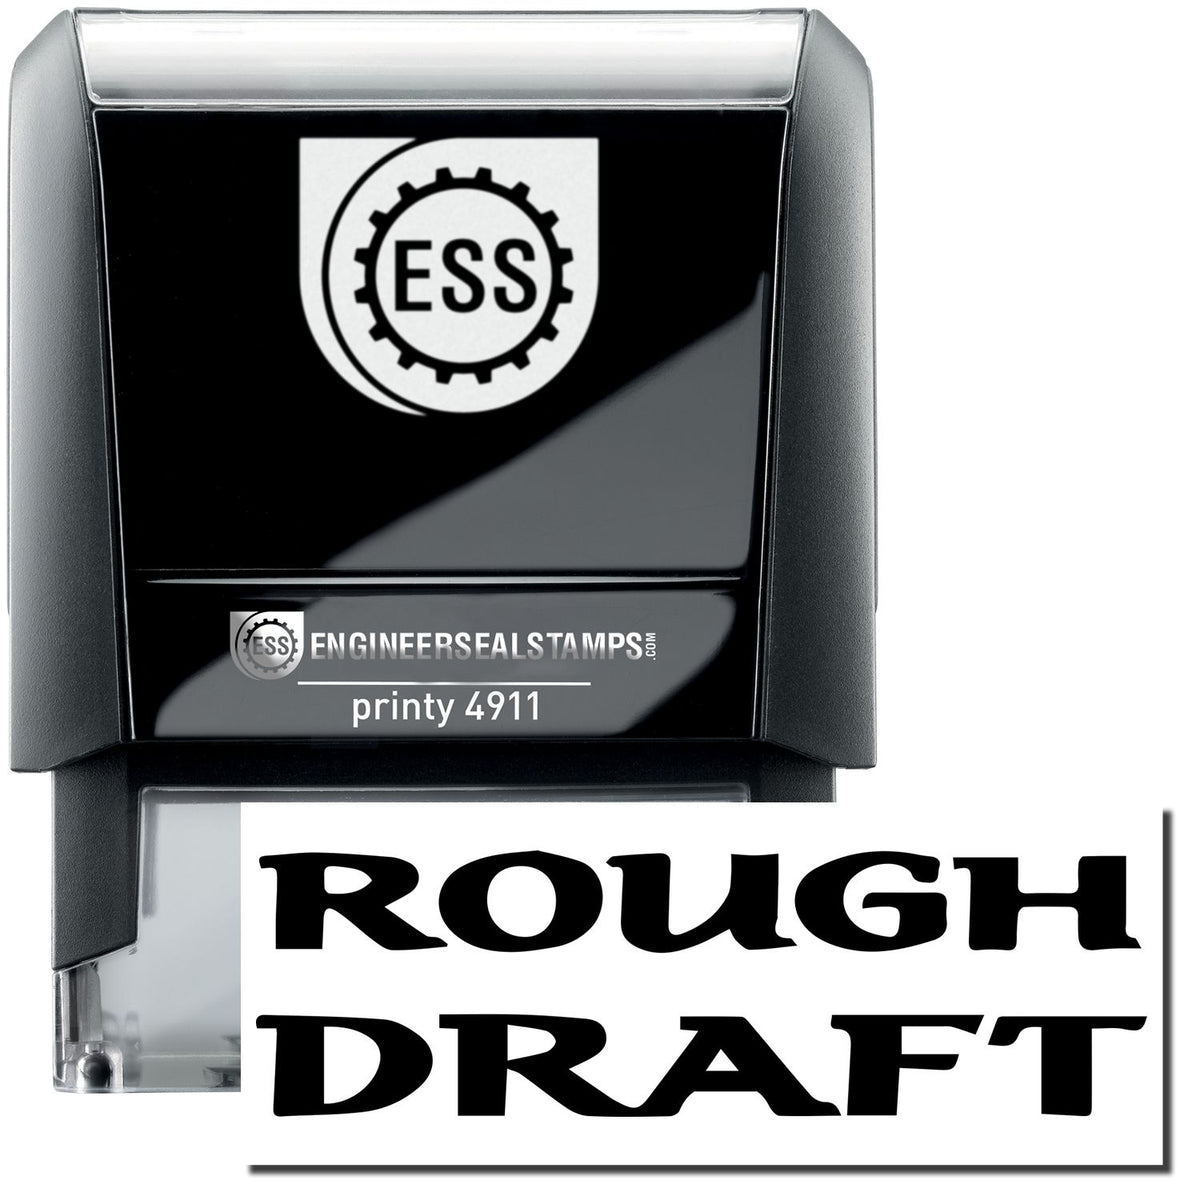 A self-inking stamp with a stamped image showing how the text &quot;ROUGH DRAFT&quot; in bold font is displayed after stamping.